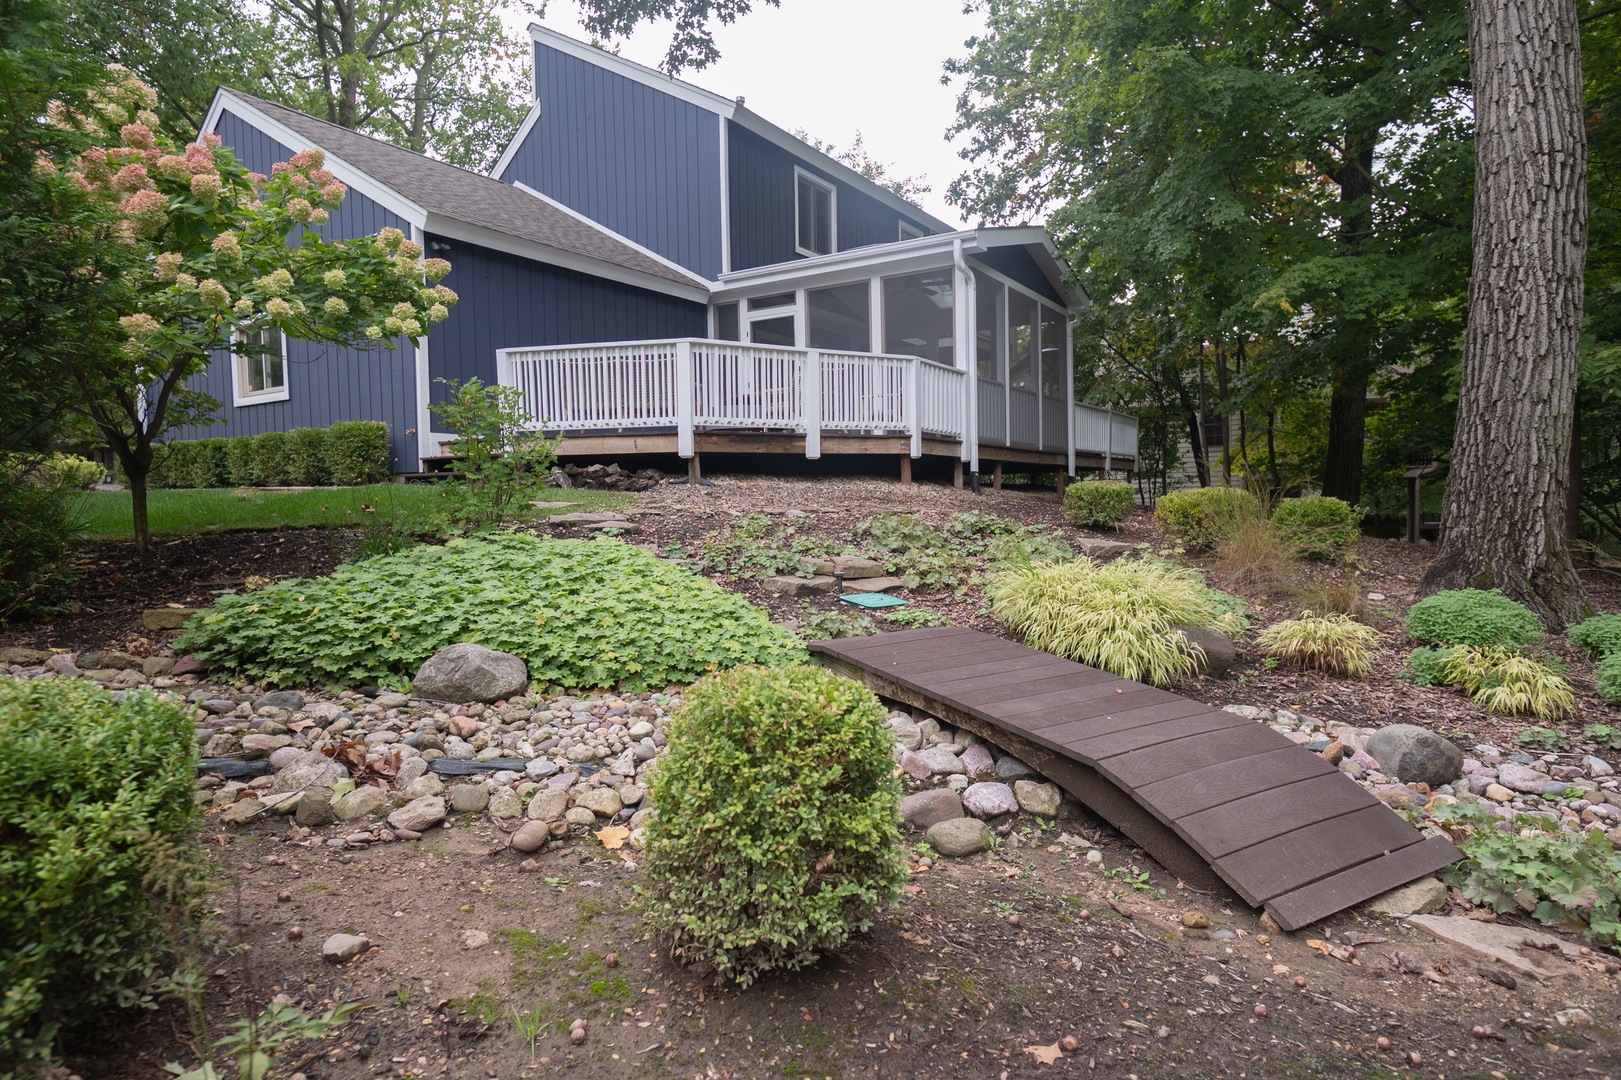 Enjoy relaxing in the fresh air on the screened or open back deck